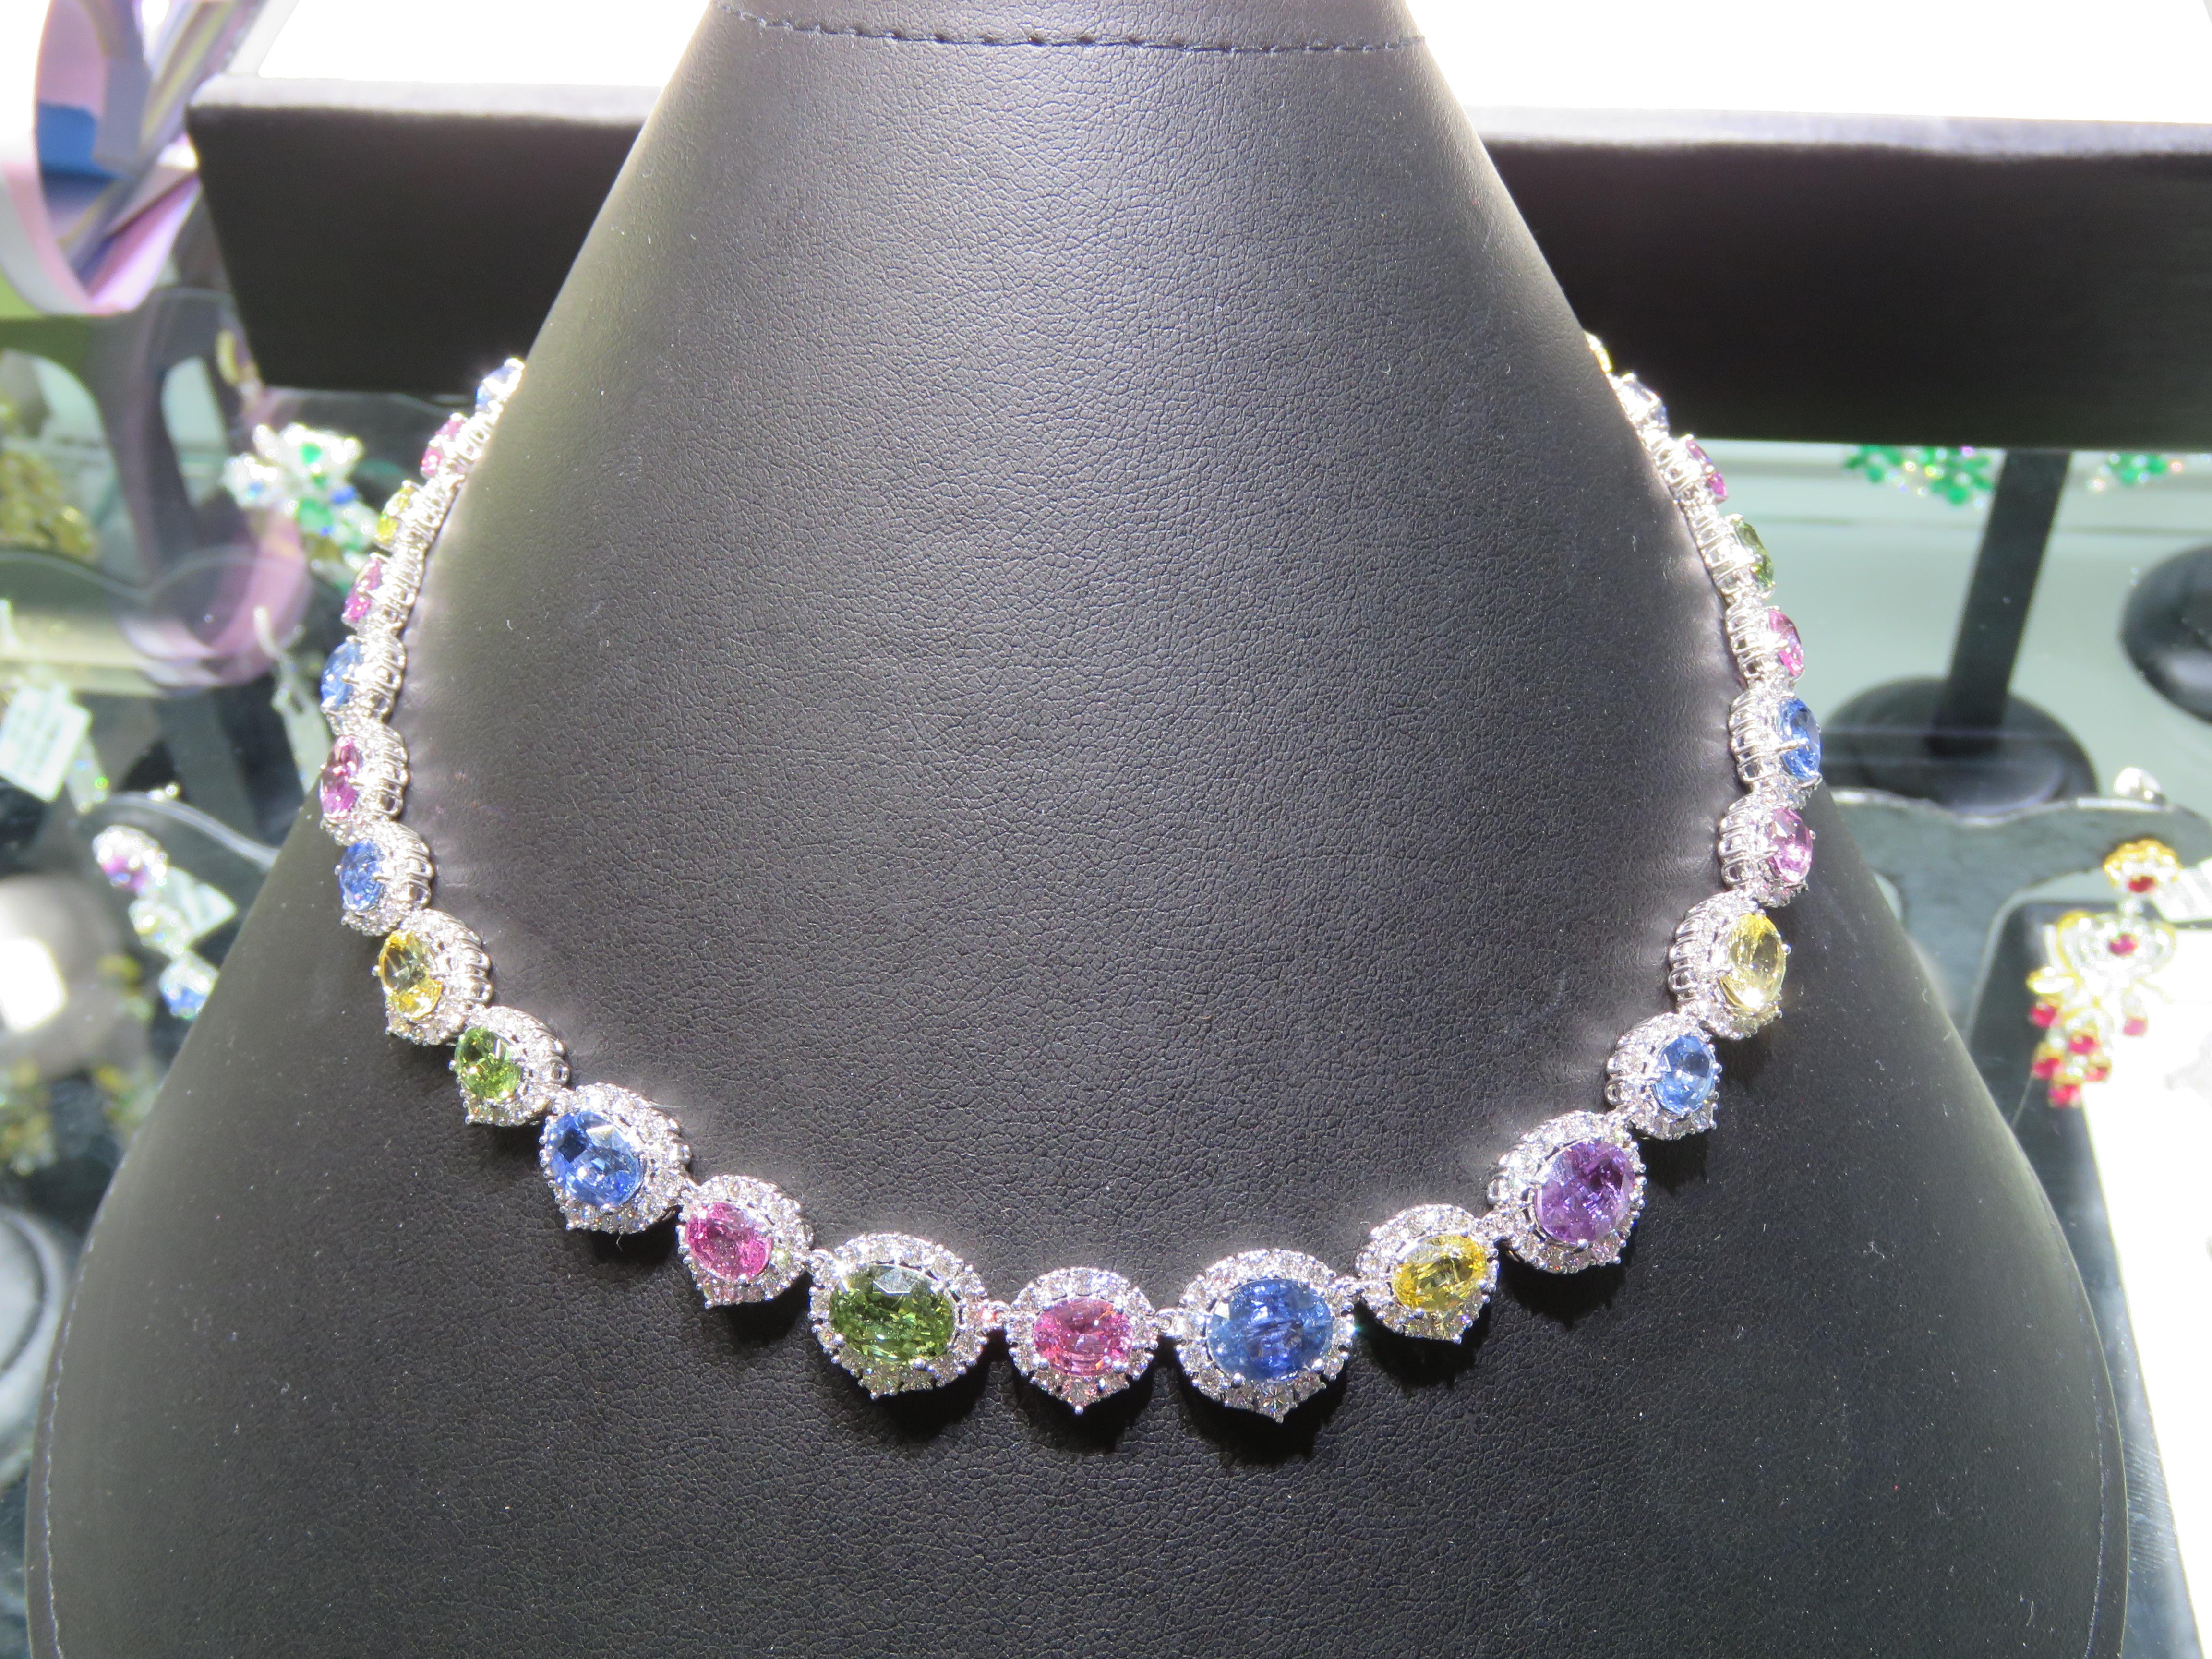 The Following Items we are offering is a Rare Important Gorgeous 18KT White Gold Exquisite Glittering Natural Fancy Colored Sapphire Diamond Necklace!!!! Necklace features Outstanding Shimmering Gorgeous Extremely Rare Large Fancy Multi Colored